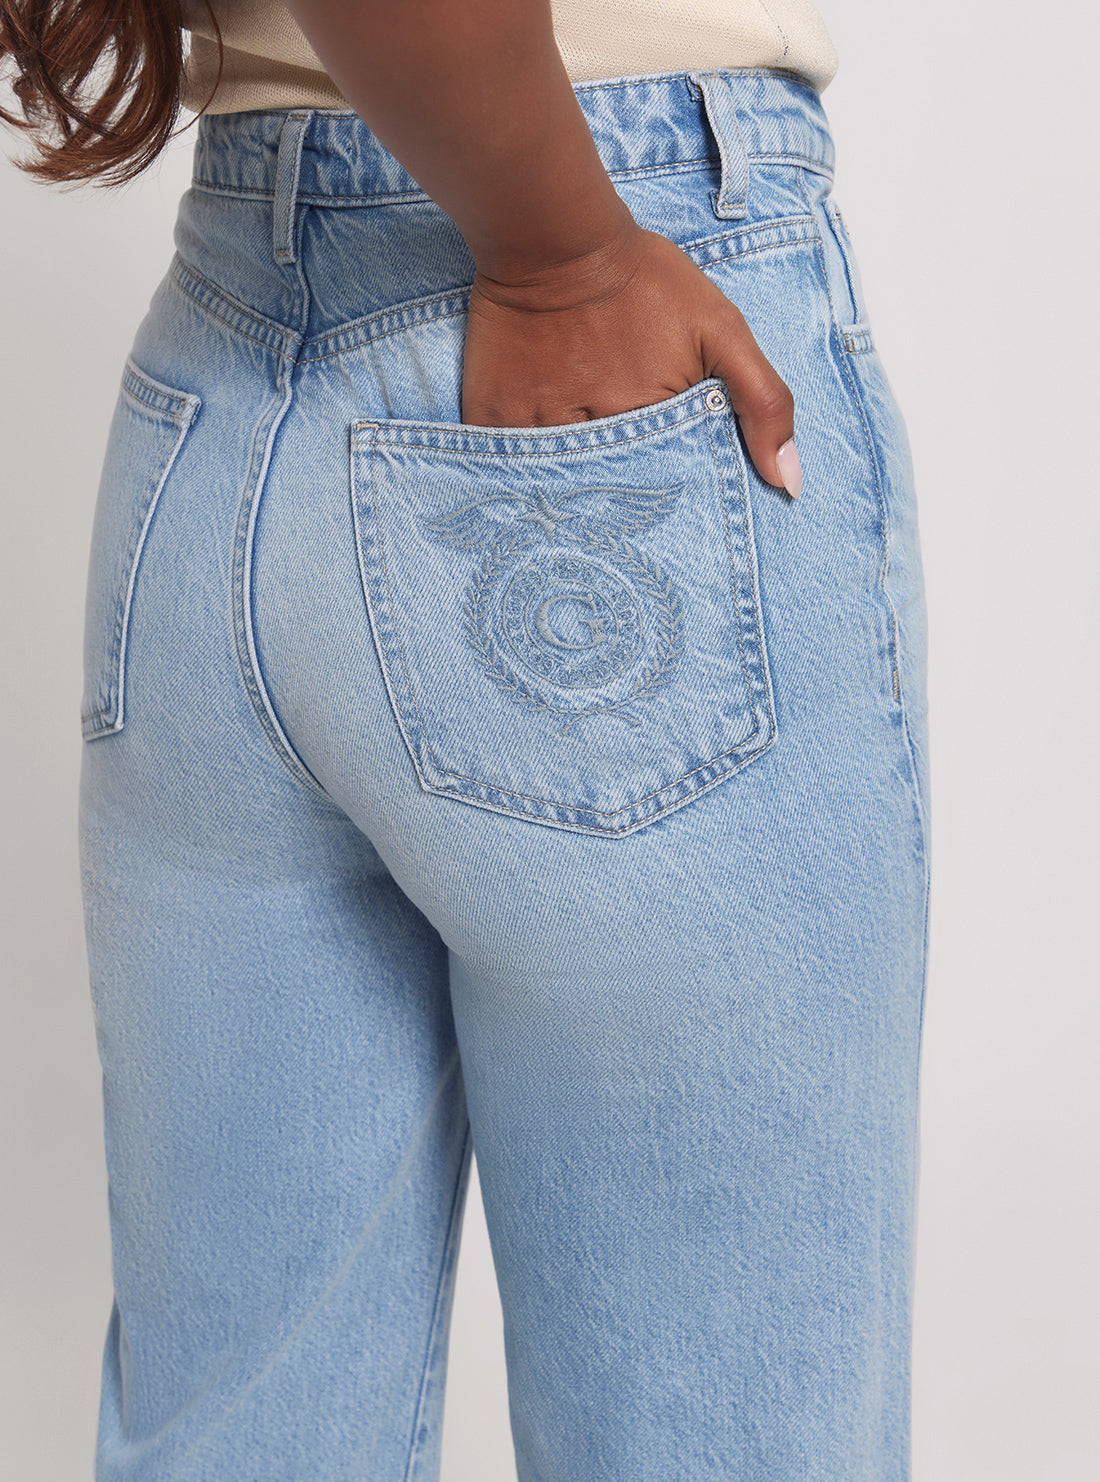 GUESS High-Rise Paz Wide Leg Denim Jeans in Light Wash detail view